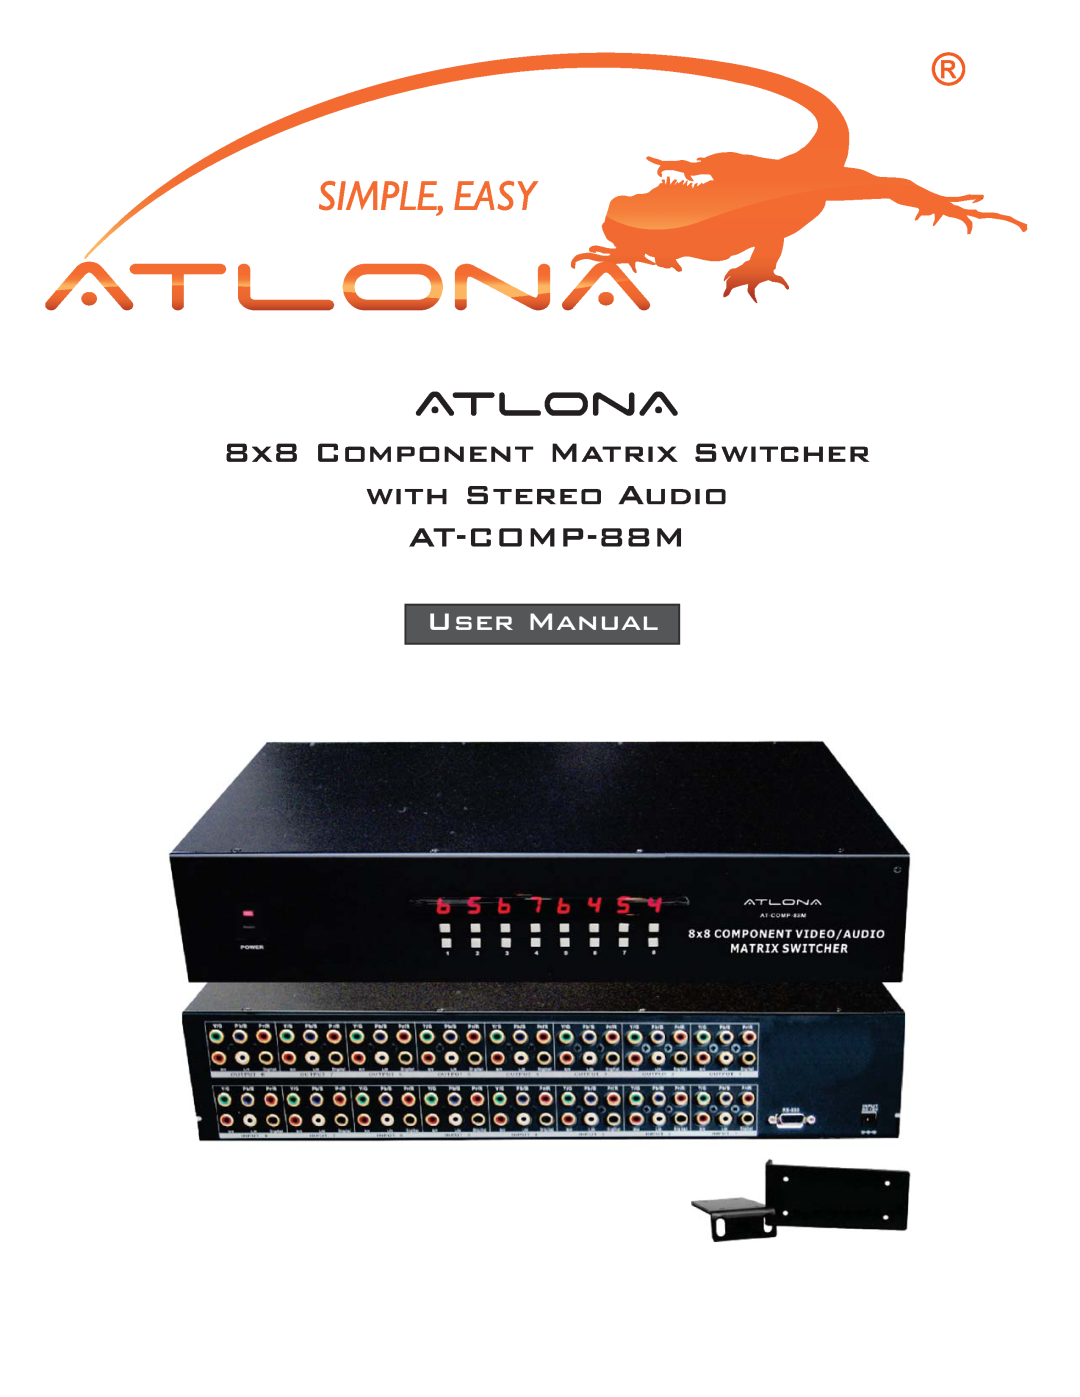 Atlona user manual AtlonA, 8x8 Component Matrix Switcher with Stereo Audio AT-COMP-88M 